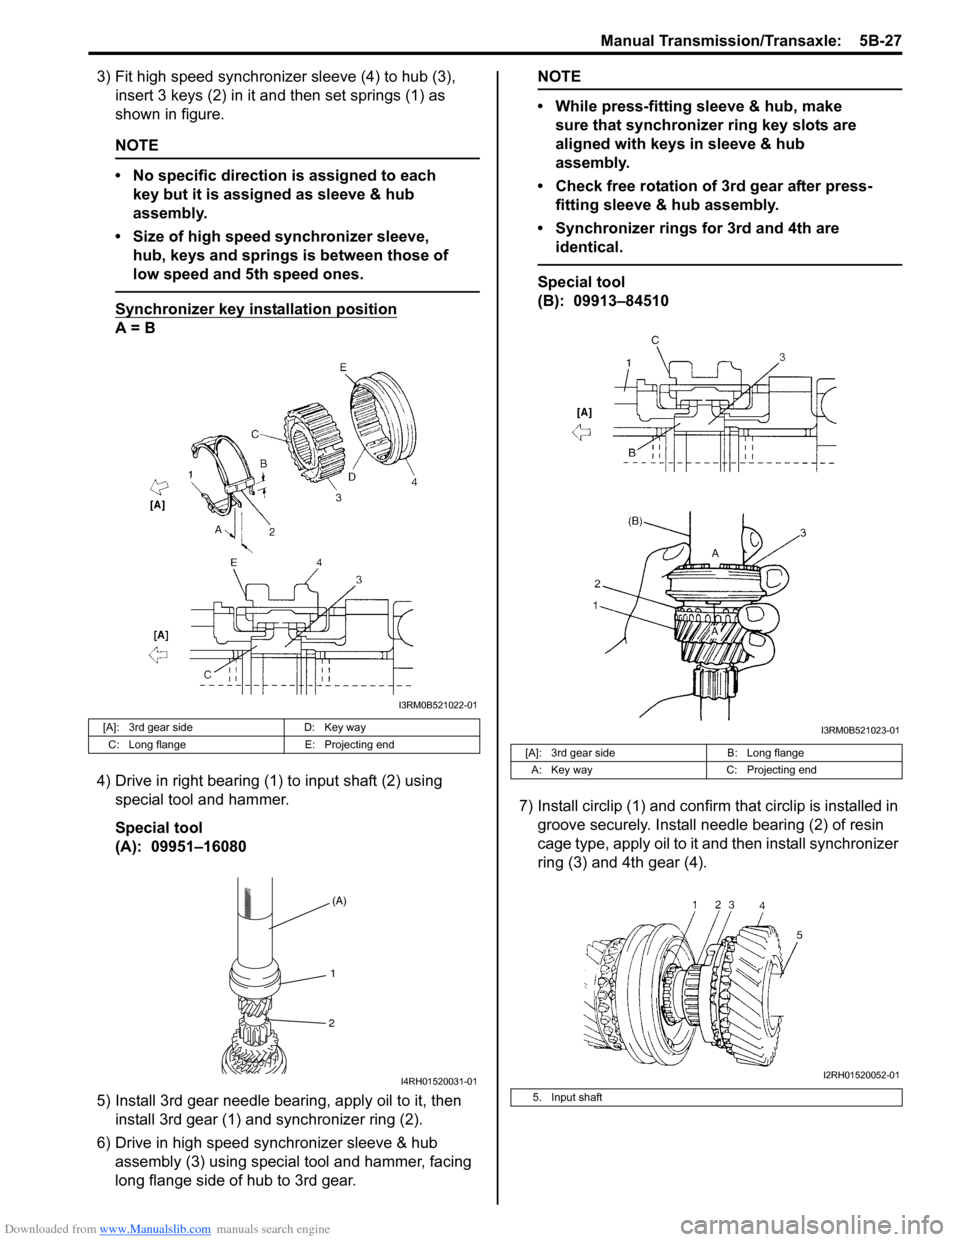 SUZUKI SWIFT 2006 2.G Service Owners Guide Downloaded from www.Manualslib.com manuals search engine Manual Transmission/Transaxle:  5B-27
3) Fit high speed synchronizer sleeve (4) to hub (3), insert 3 keys (2) in it and then set springs (1) as